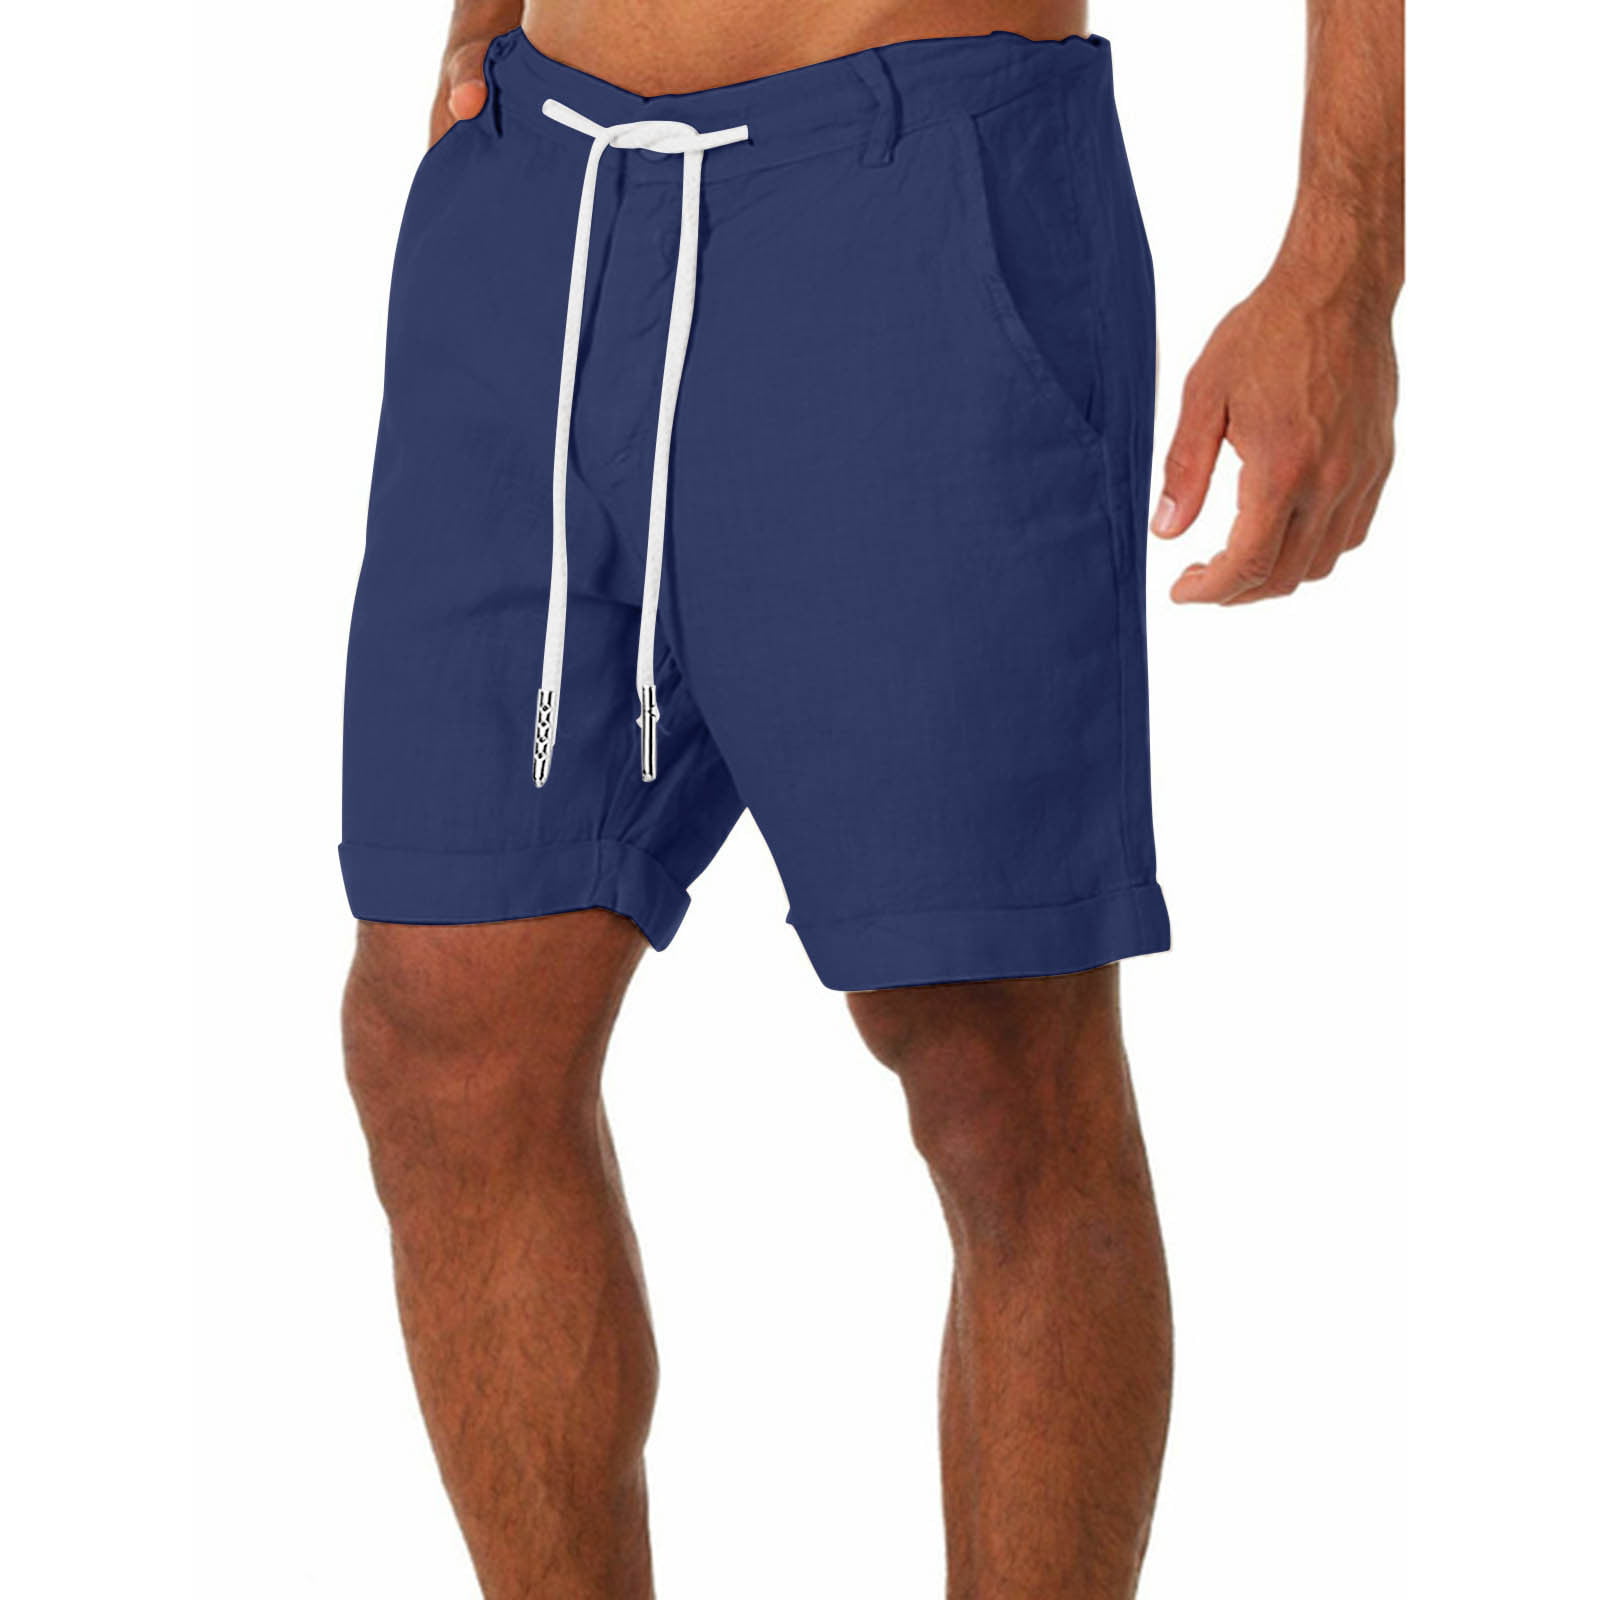 Mens Casual Cotton Linen Shorts Classic Fit Beach Shorts with Pockets